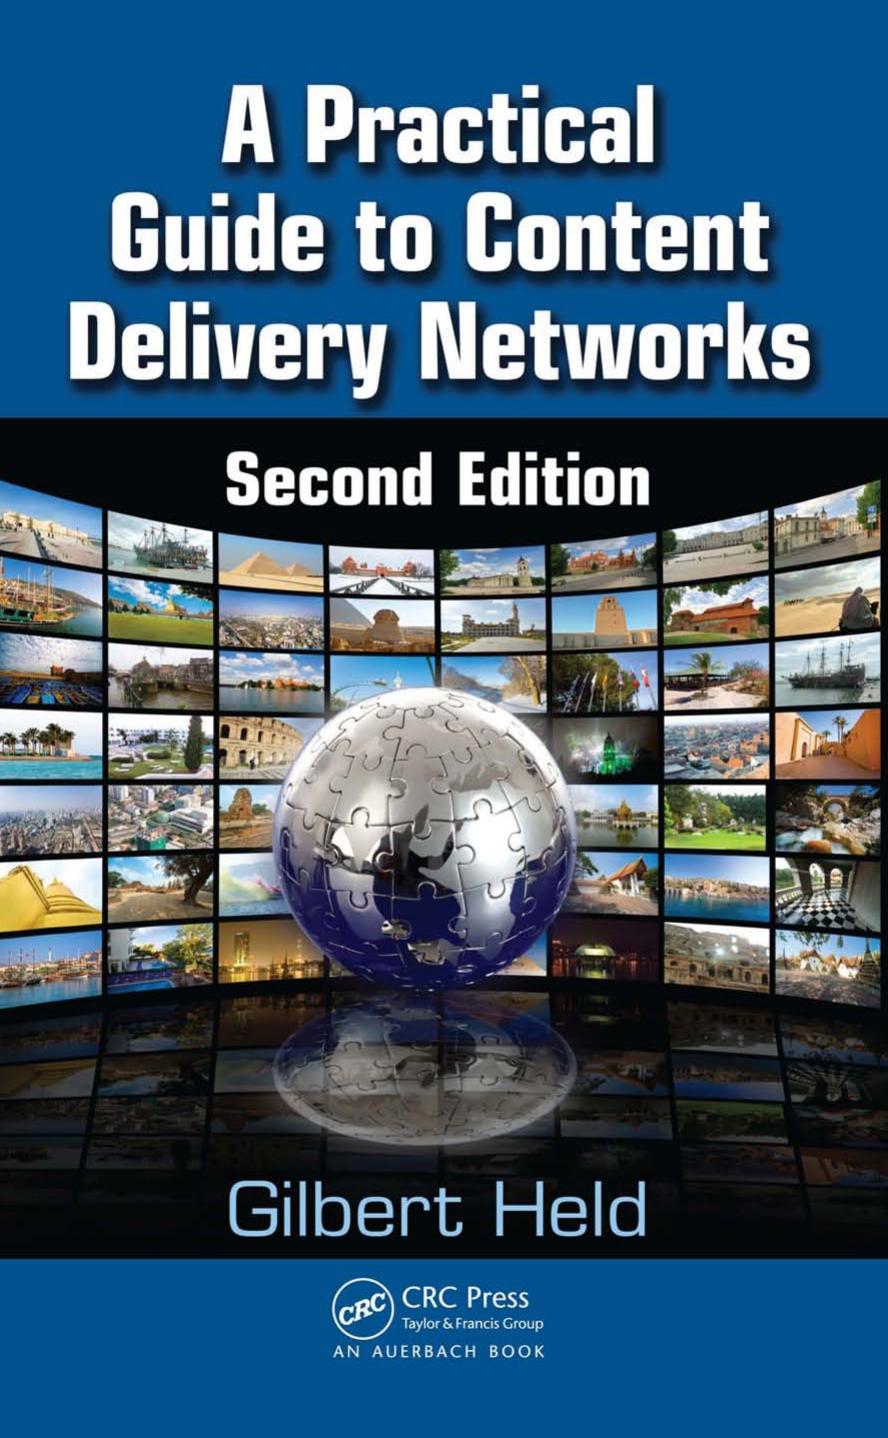 A Practical Guide to Content Delivery Networks, Second Edition